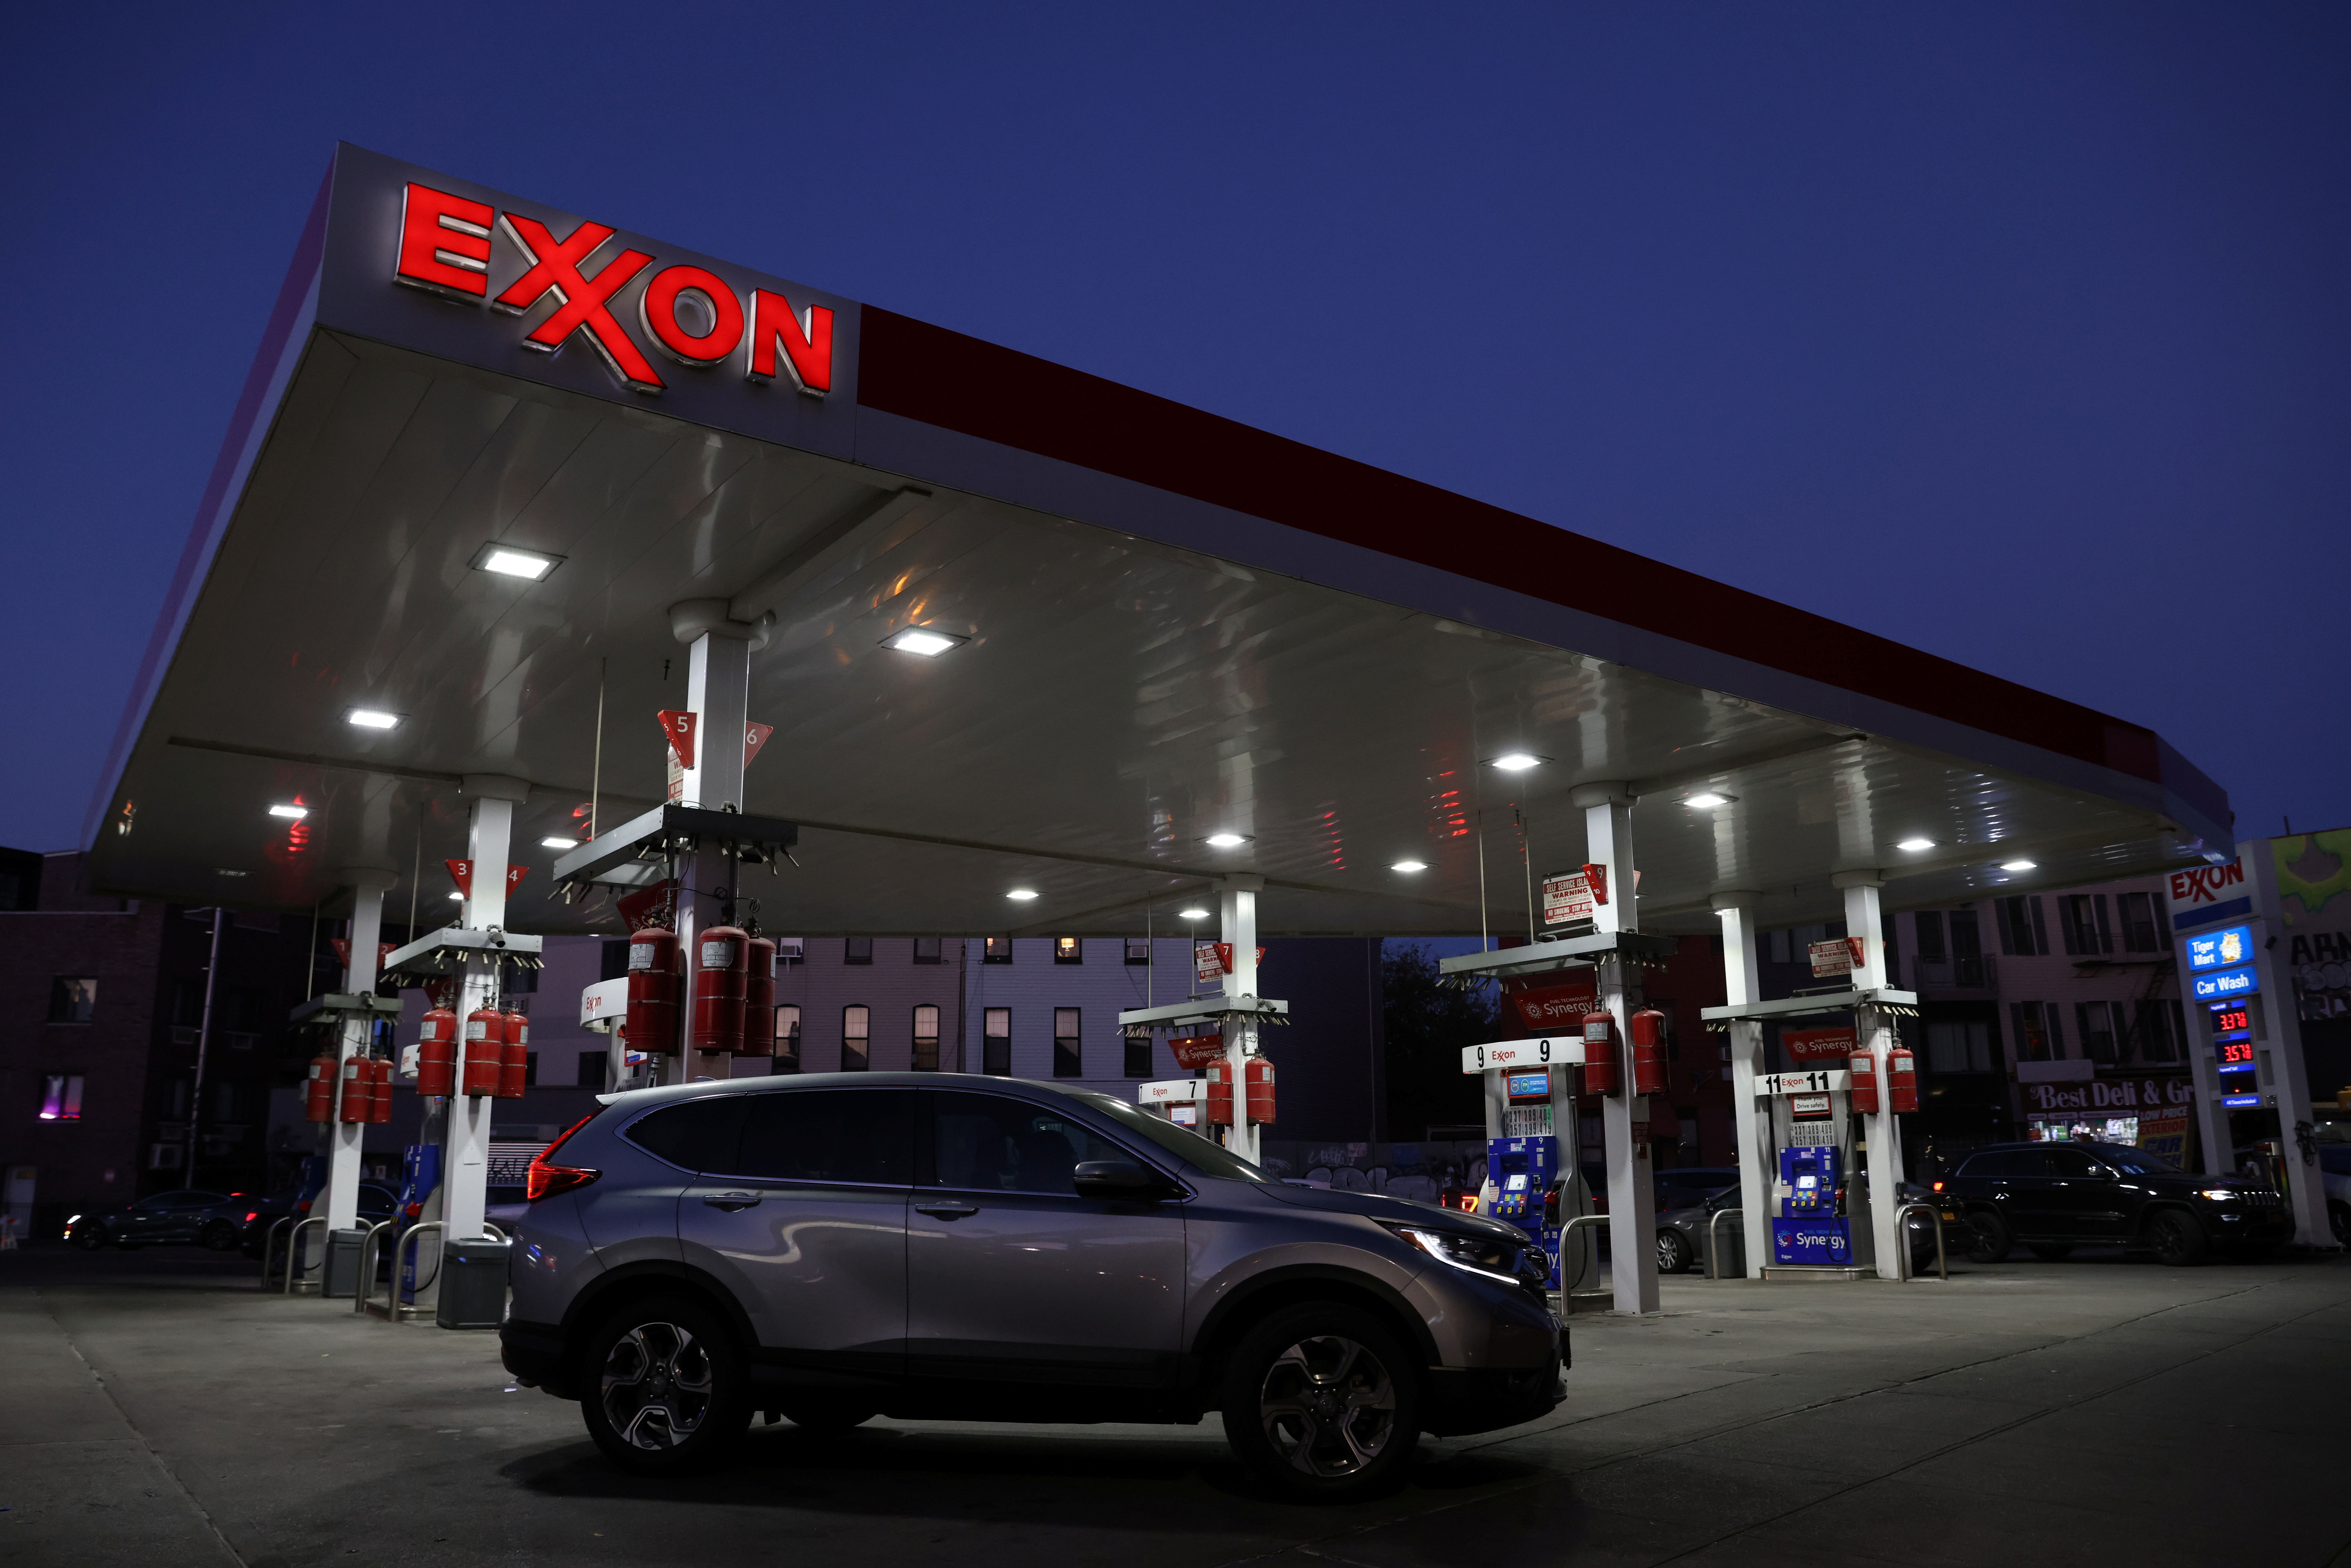 Cars are seen at an Exxon gas station in Brooklyn, New York City